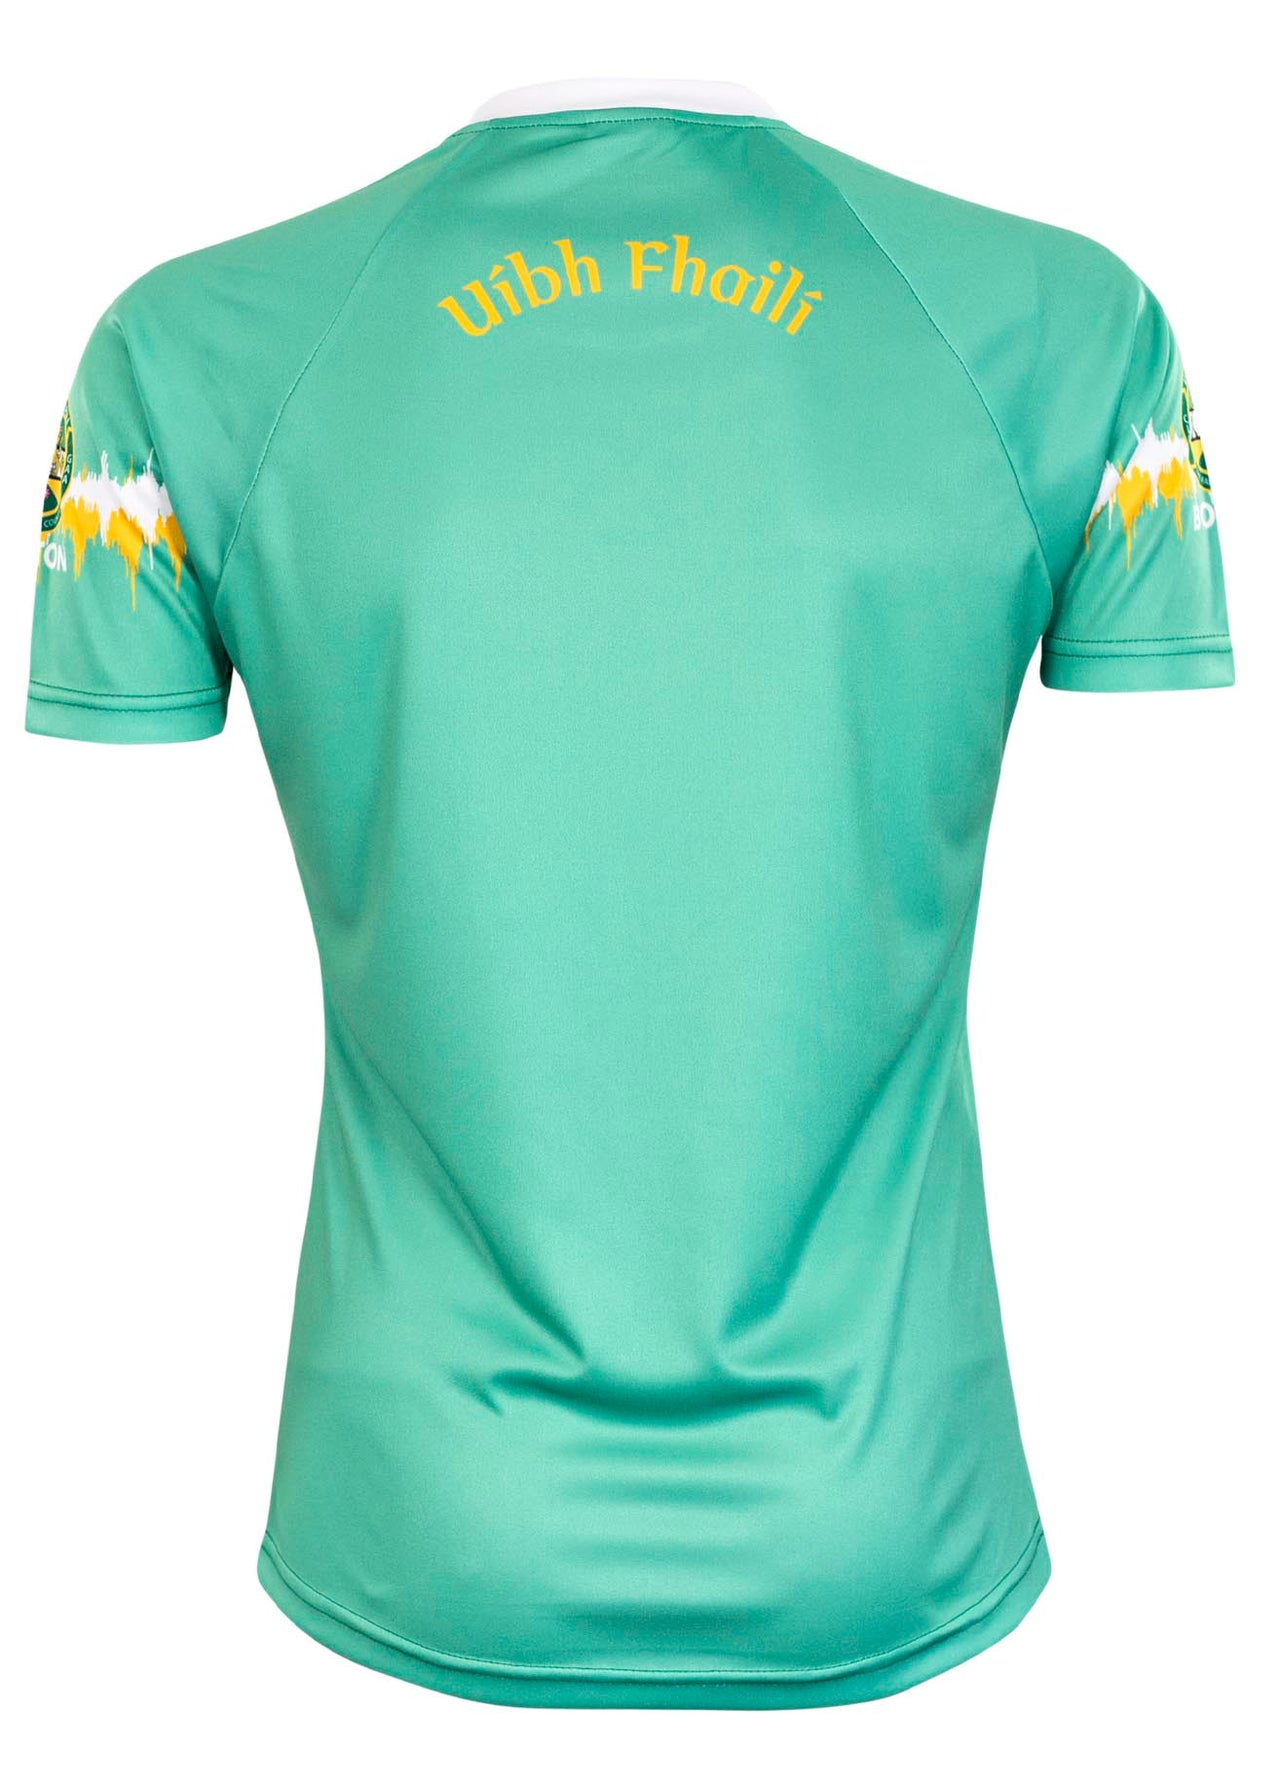 Offaly Boston Special Edition Jersey Regular Fit Adult